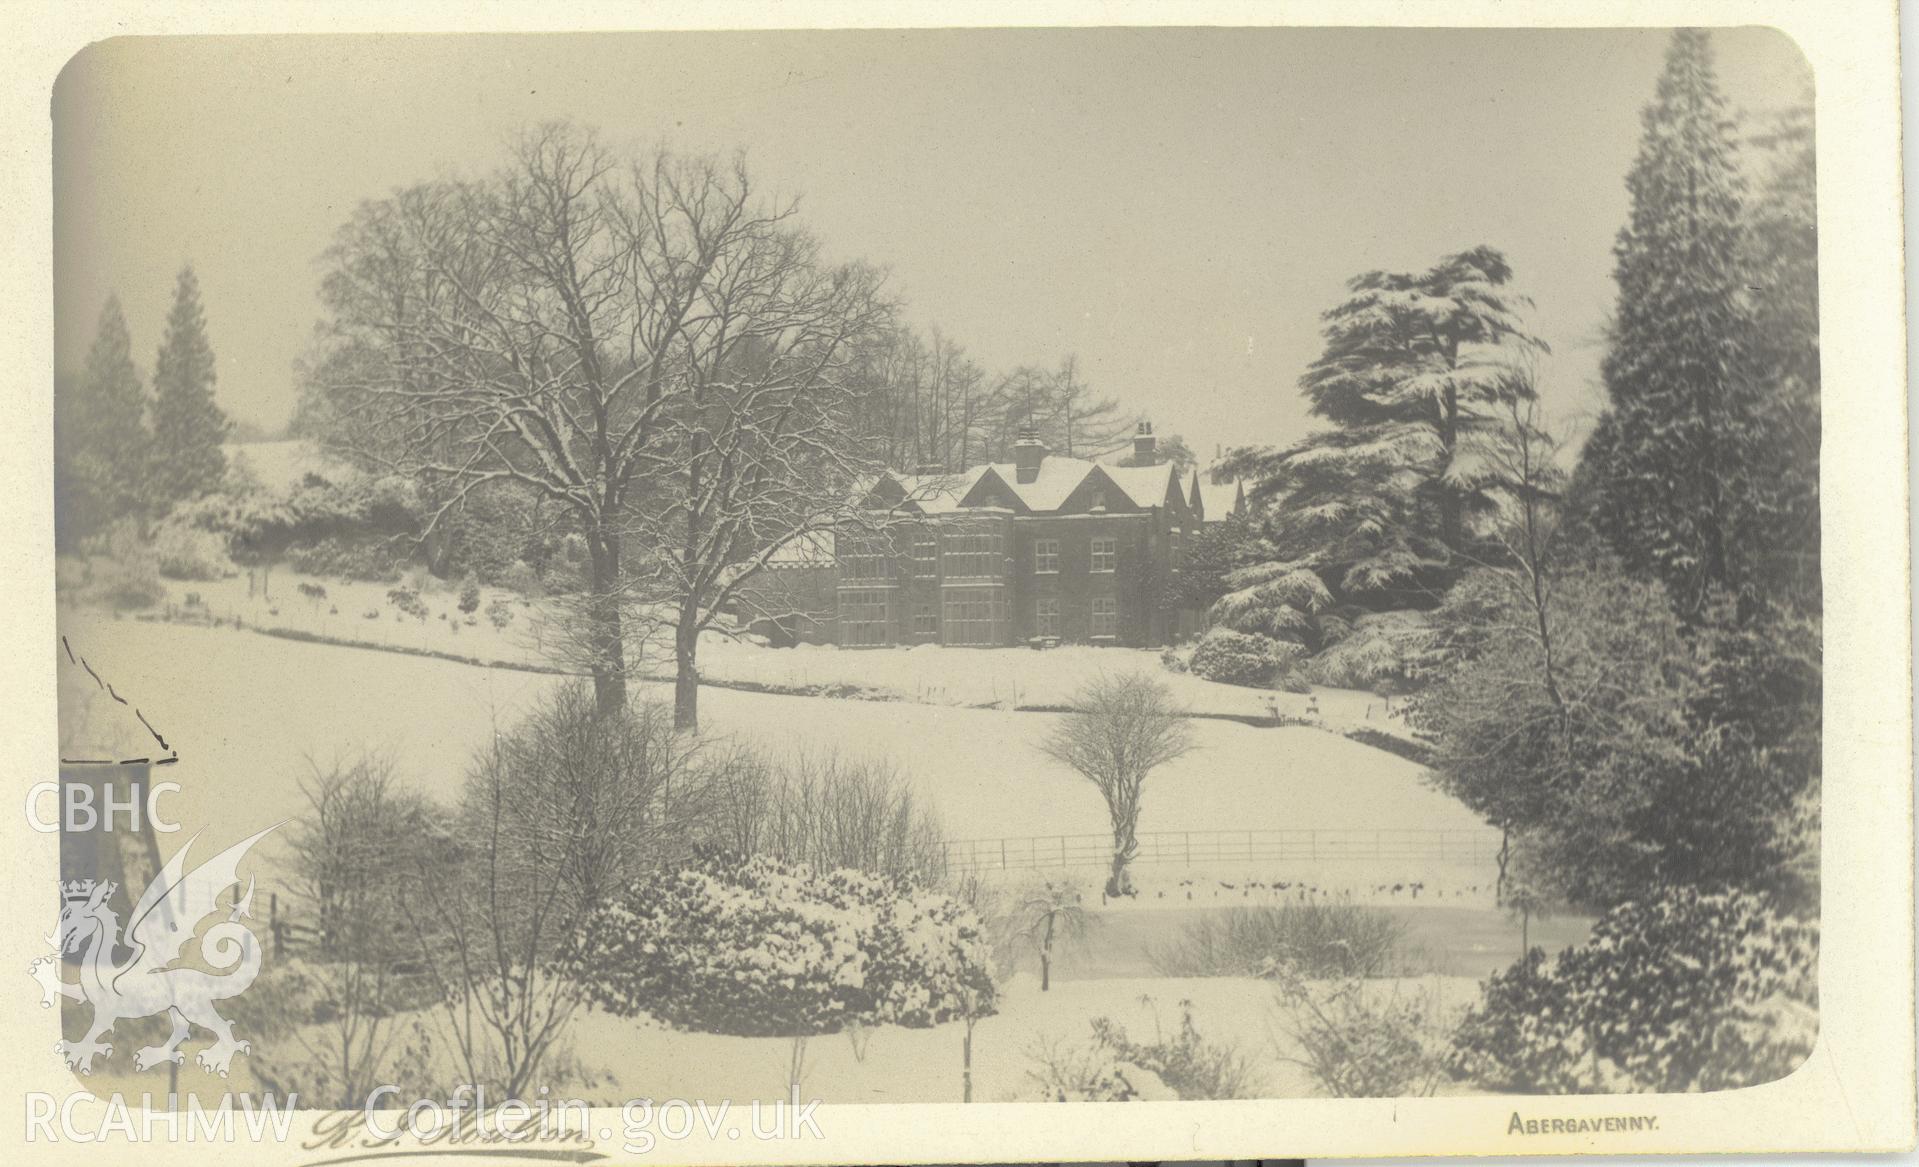 Digitised postcard image of Llanfihangel Court, Crucorney, in snow, R.J. Houlson, Abergavenny. Produced by Parks and Gardens Data Services, from an original item in the Peter Davis Collection at Parks and Gardens UK. We hold only web-resolution images of this collection, suitable for viewing on screen and for research purposes only. We do not hold the original images, or publication quality scans.